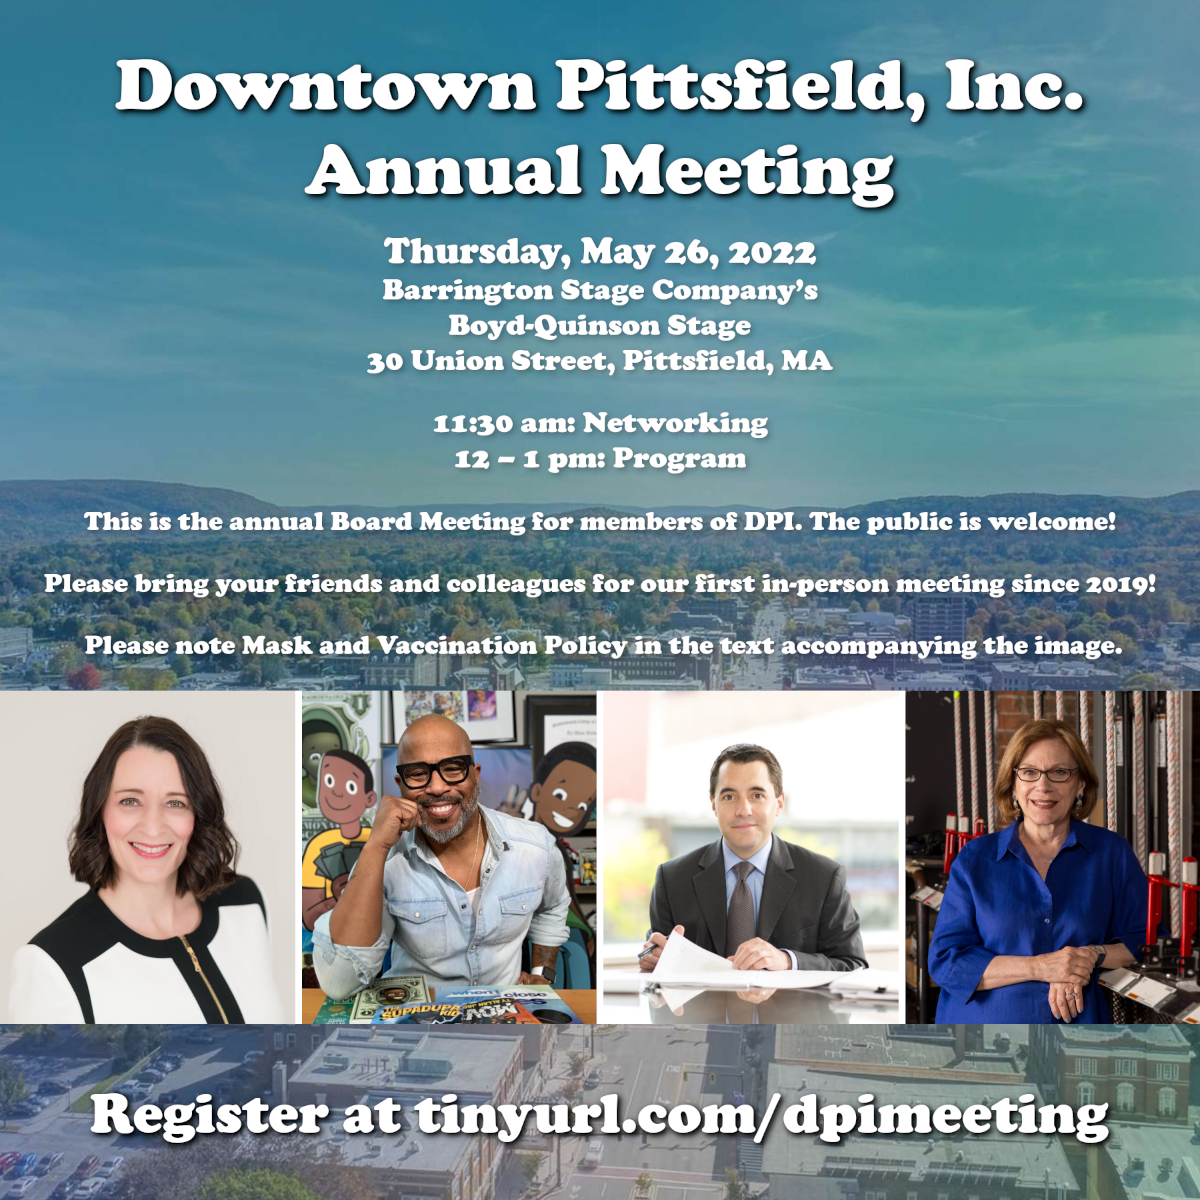 Downtown Pittsfield, Inc. Annual Meeting